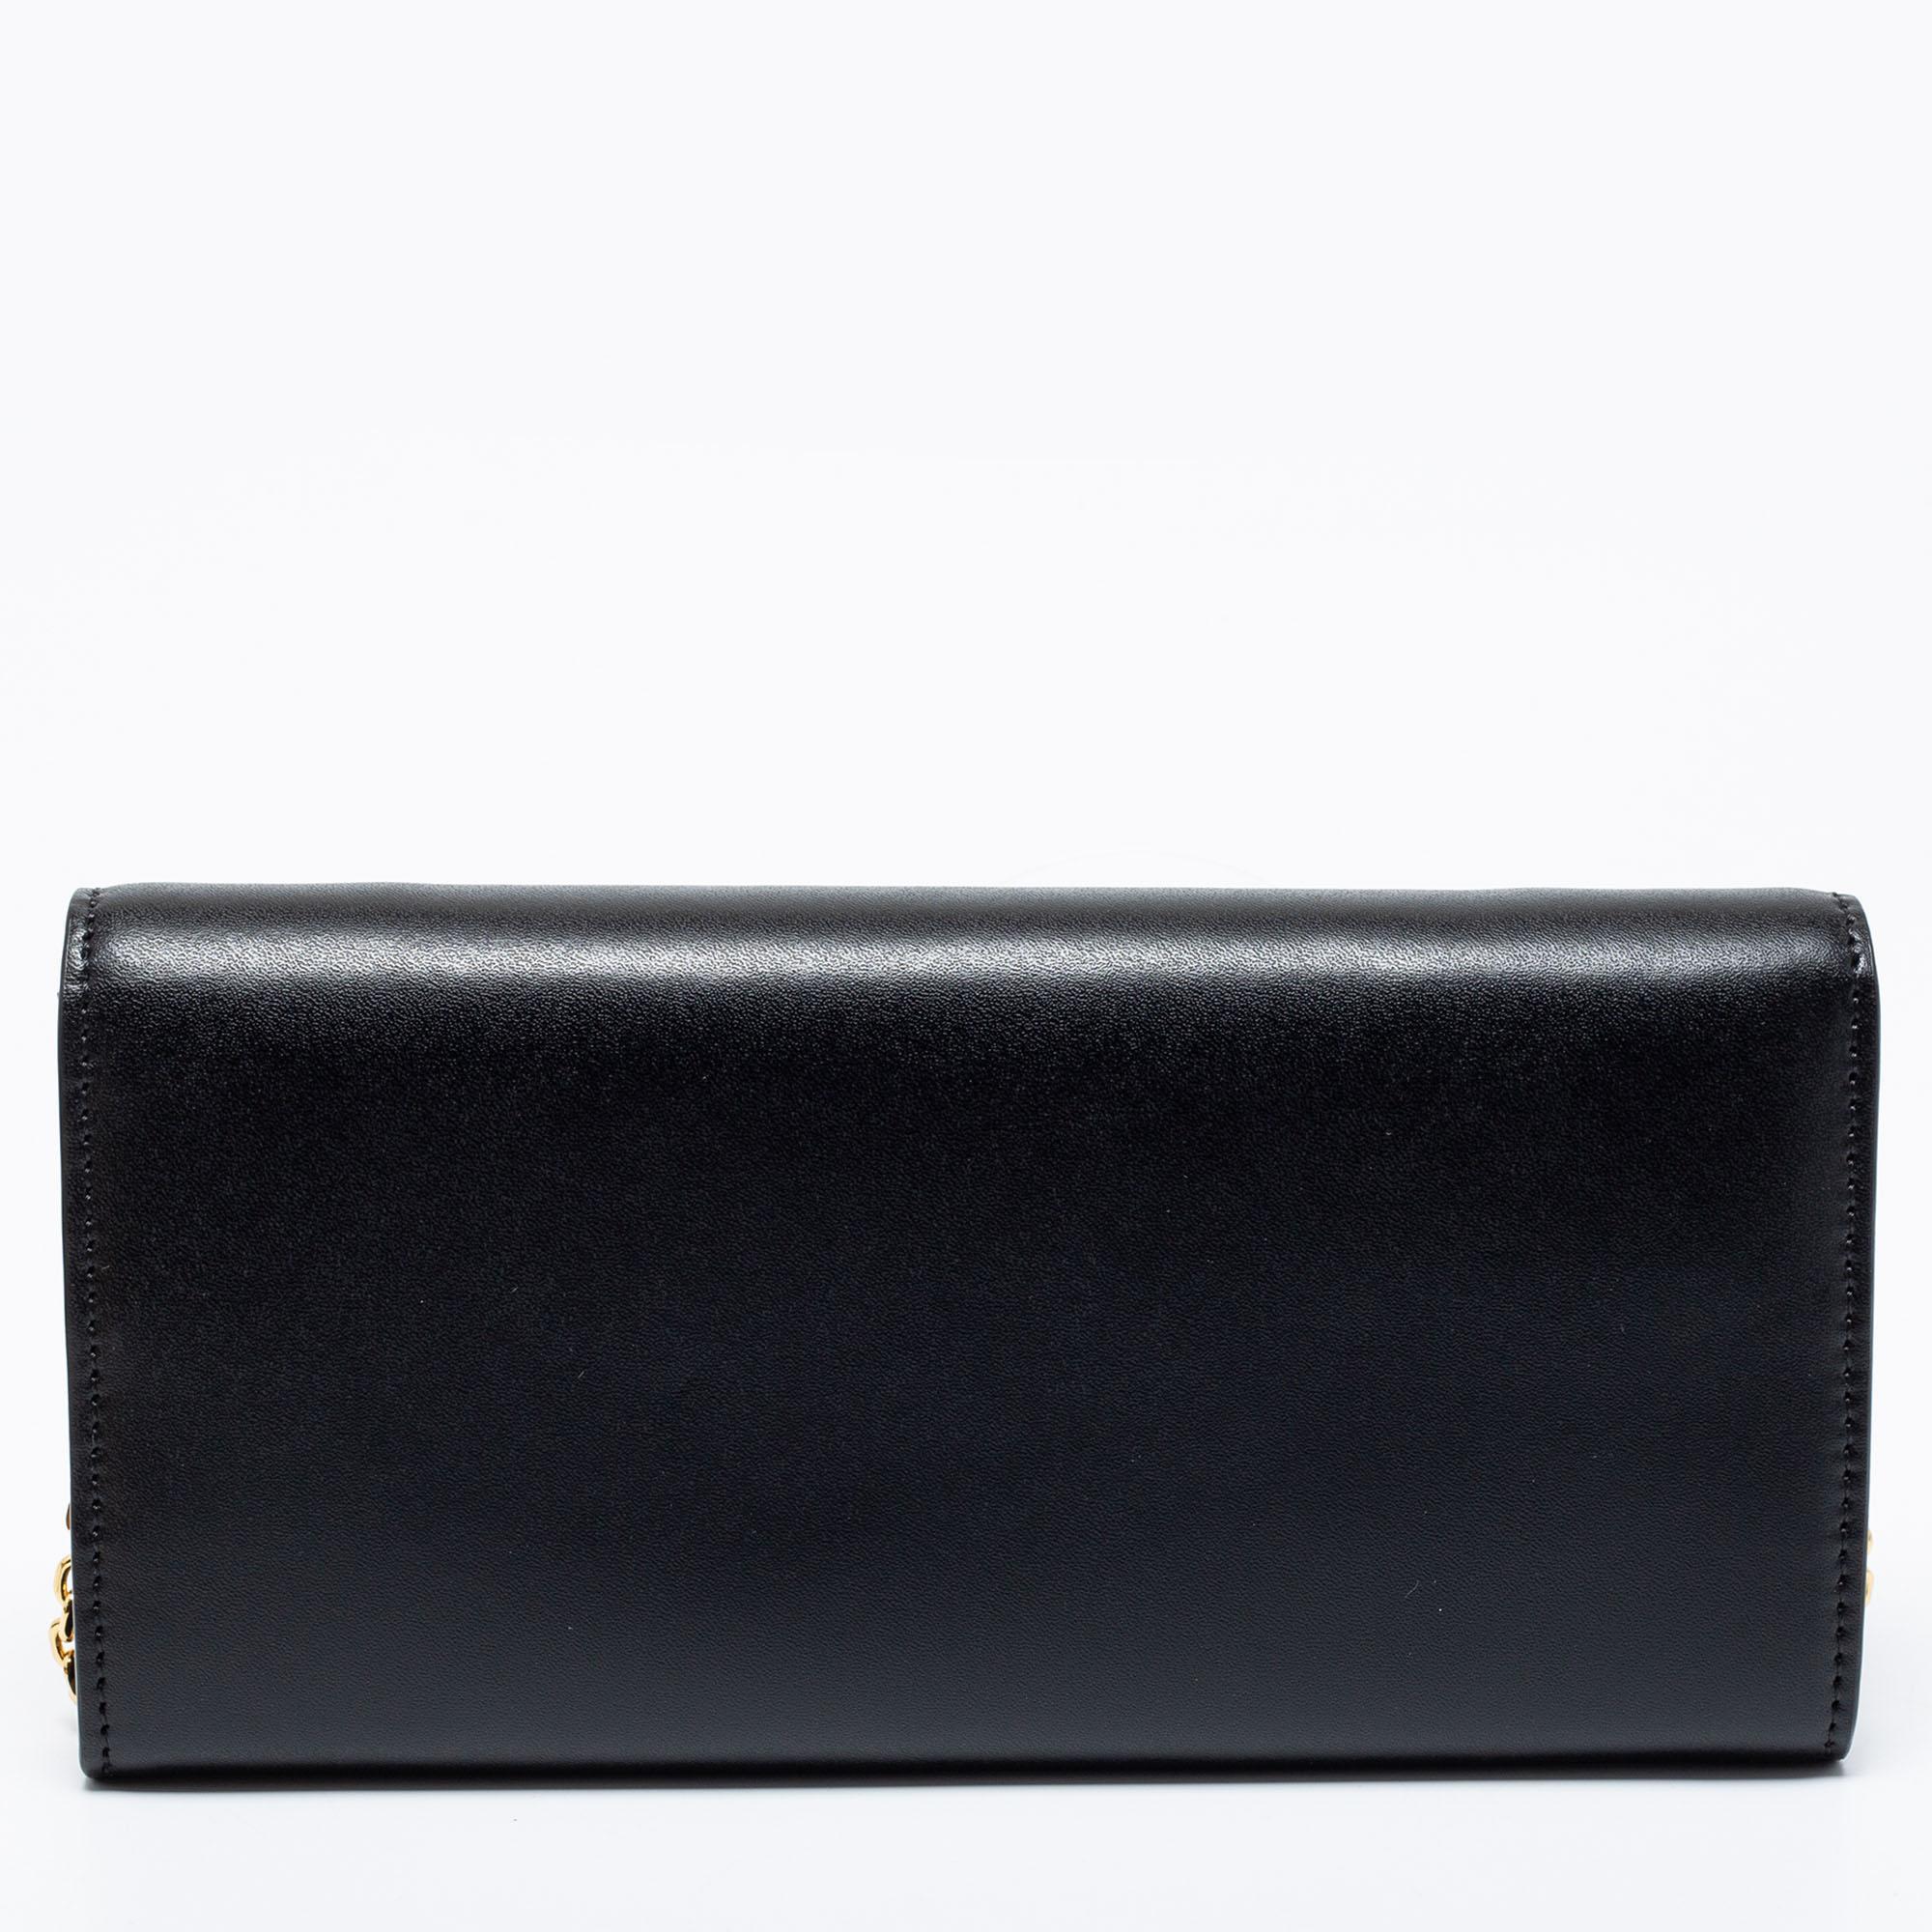 A stunning creation from the house of Fendi for the fashionable you! Crafted from luxurious leather, this black wallet-on-chain features gorgeous stud details on the front flap and a well-sized interior. It is complete with a slender chain to carry